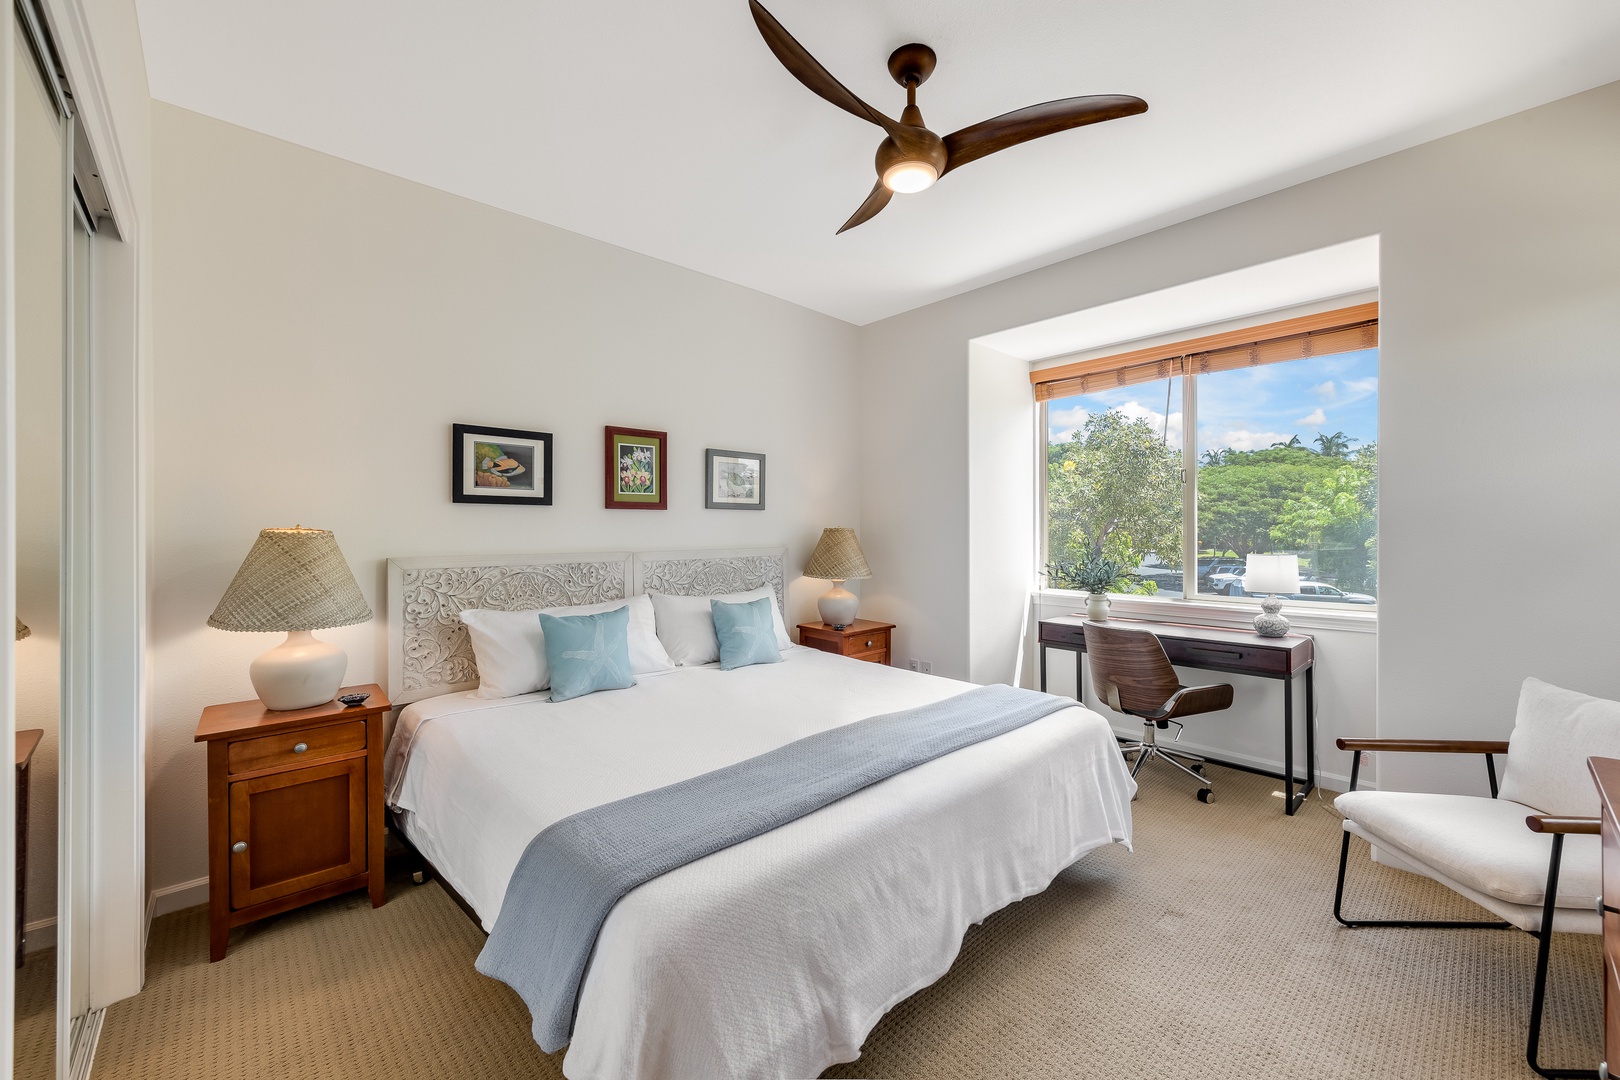 Kamuela Vacation Rentals, Mauna Lani Fairways #603 - The twin beds can be converted into a king upon advance request. A workspace window nook provides a desk and a lovely view out over the treetops.